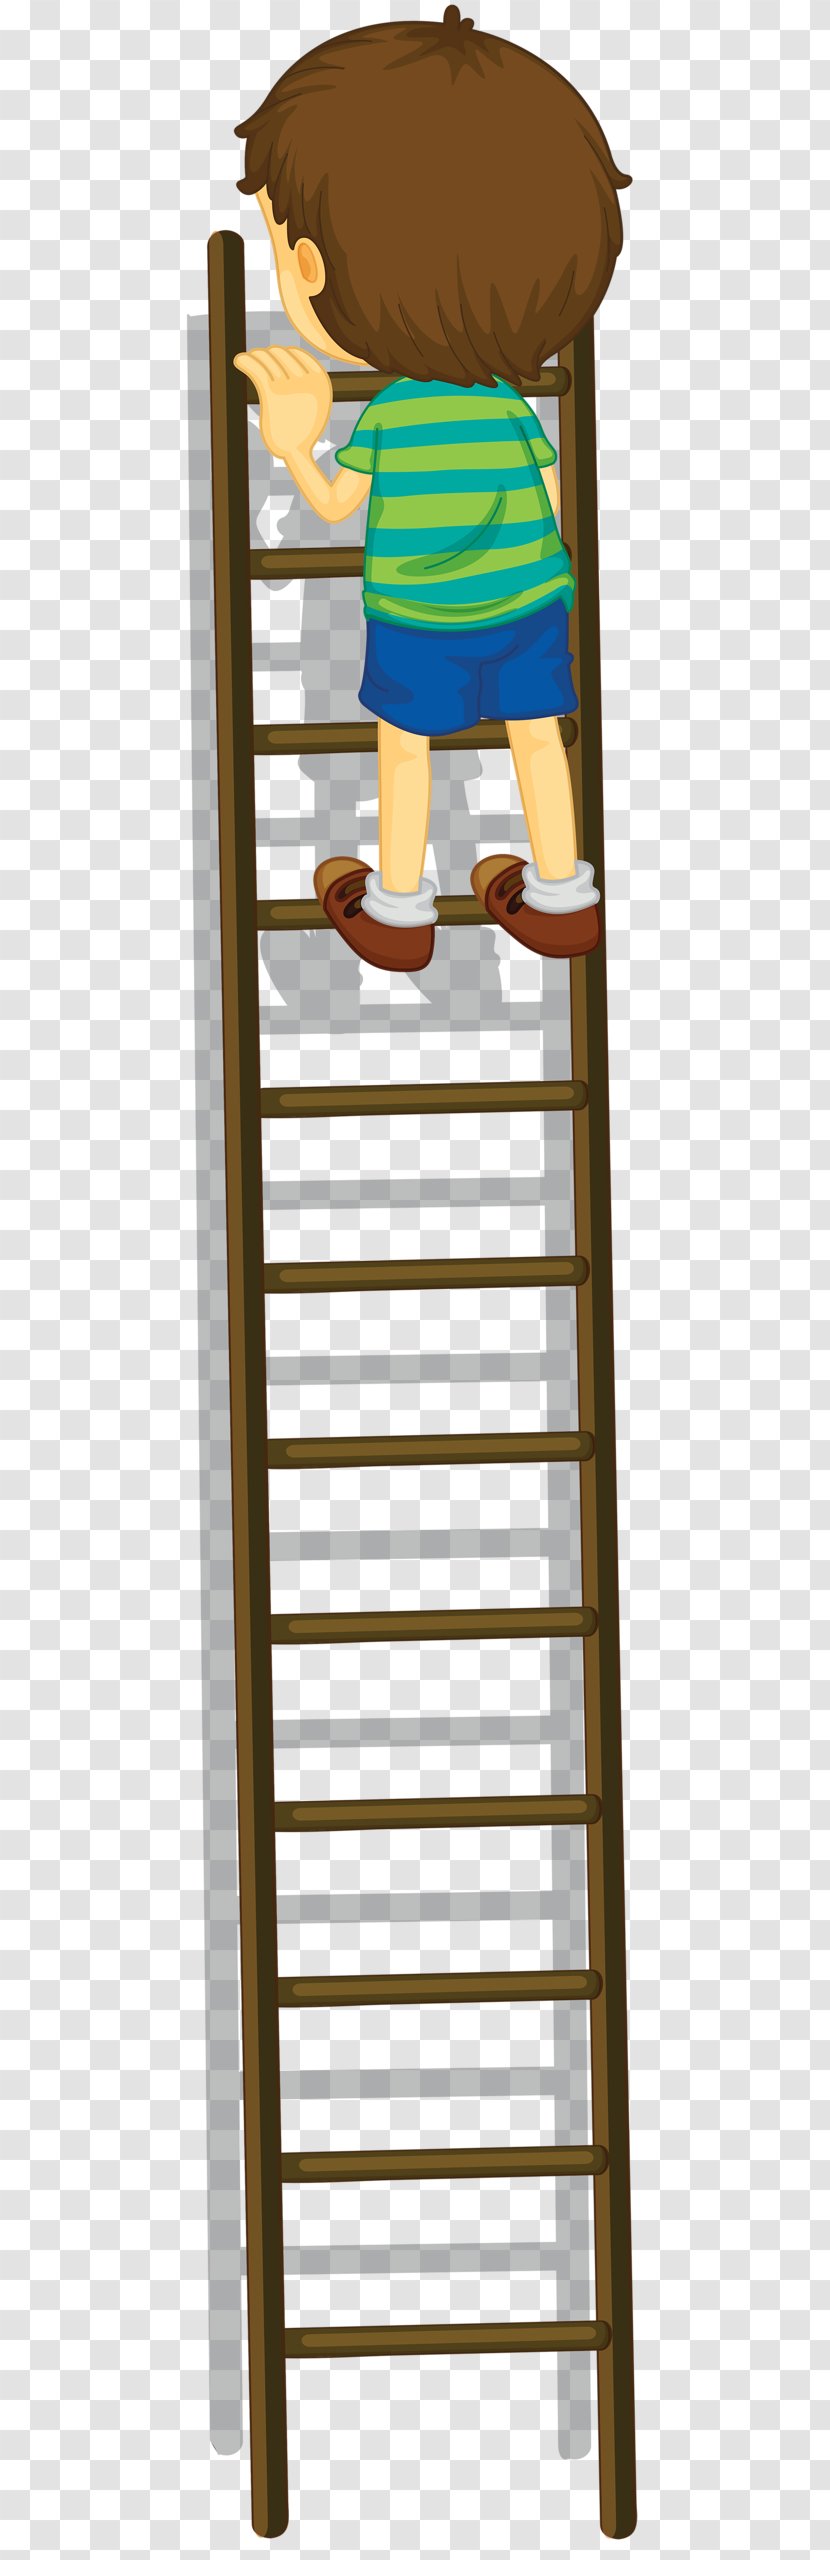 Ladder Drawing Cartoon - Stairs Transparent PNG